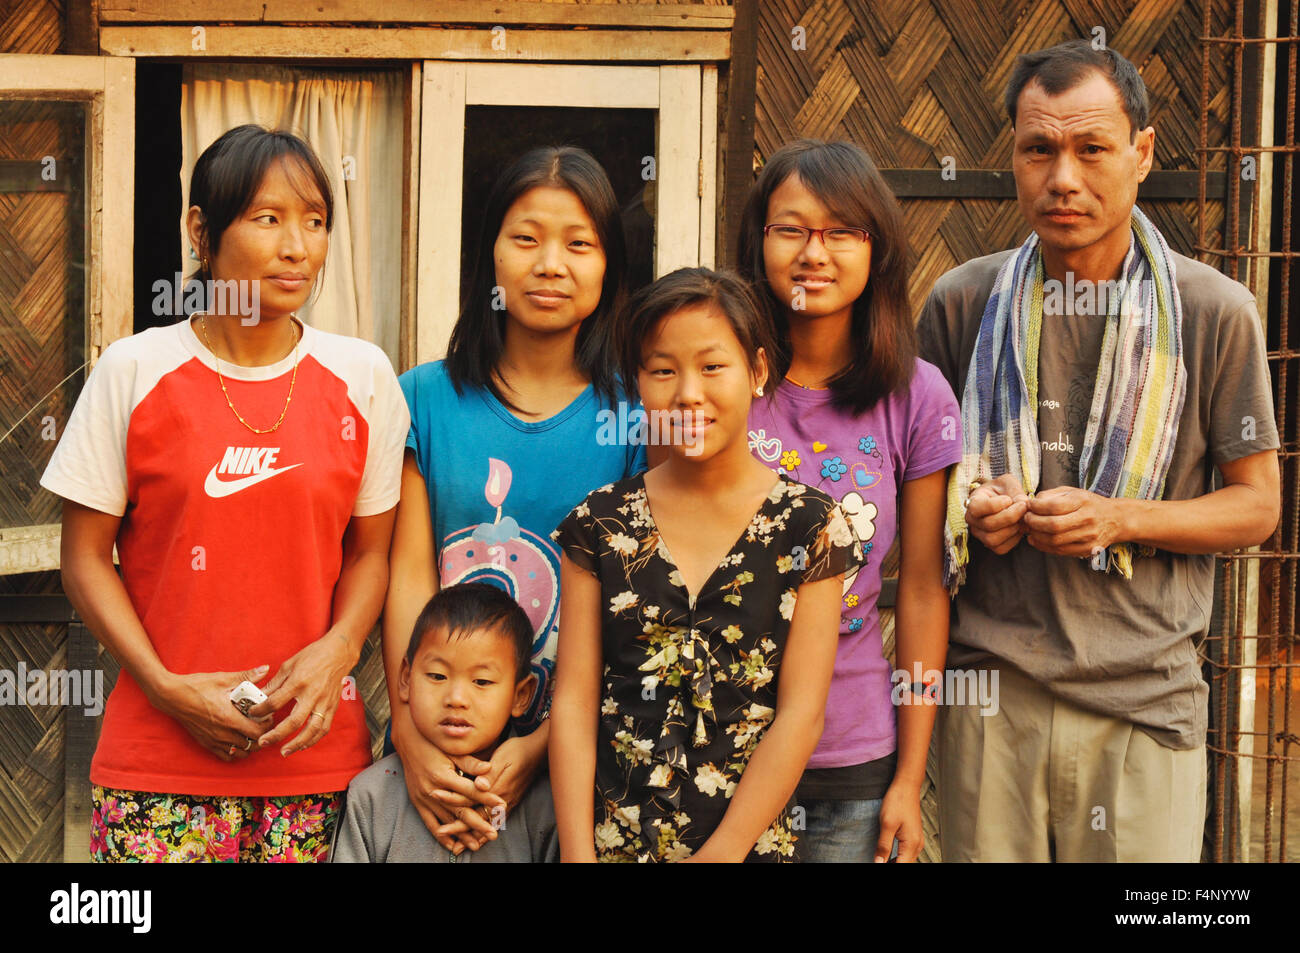 Nagaland, India - March 2012: Portrait of family in Nagaland, remote region of India. Documentary editorial. Stock Photo